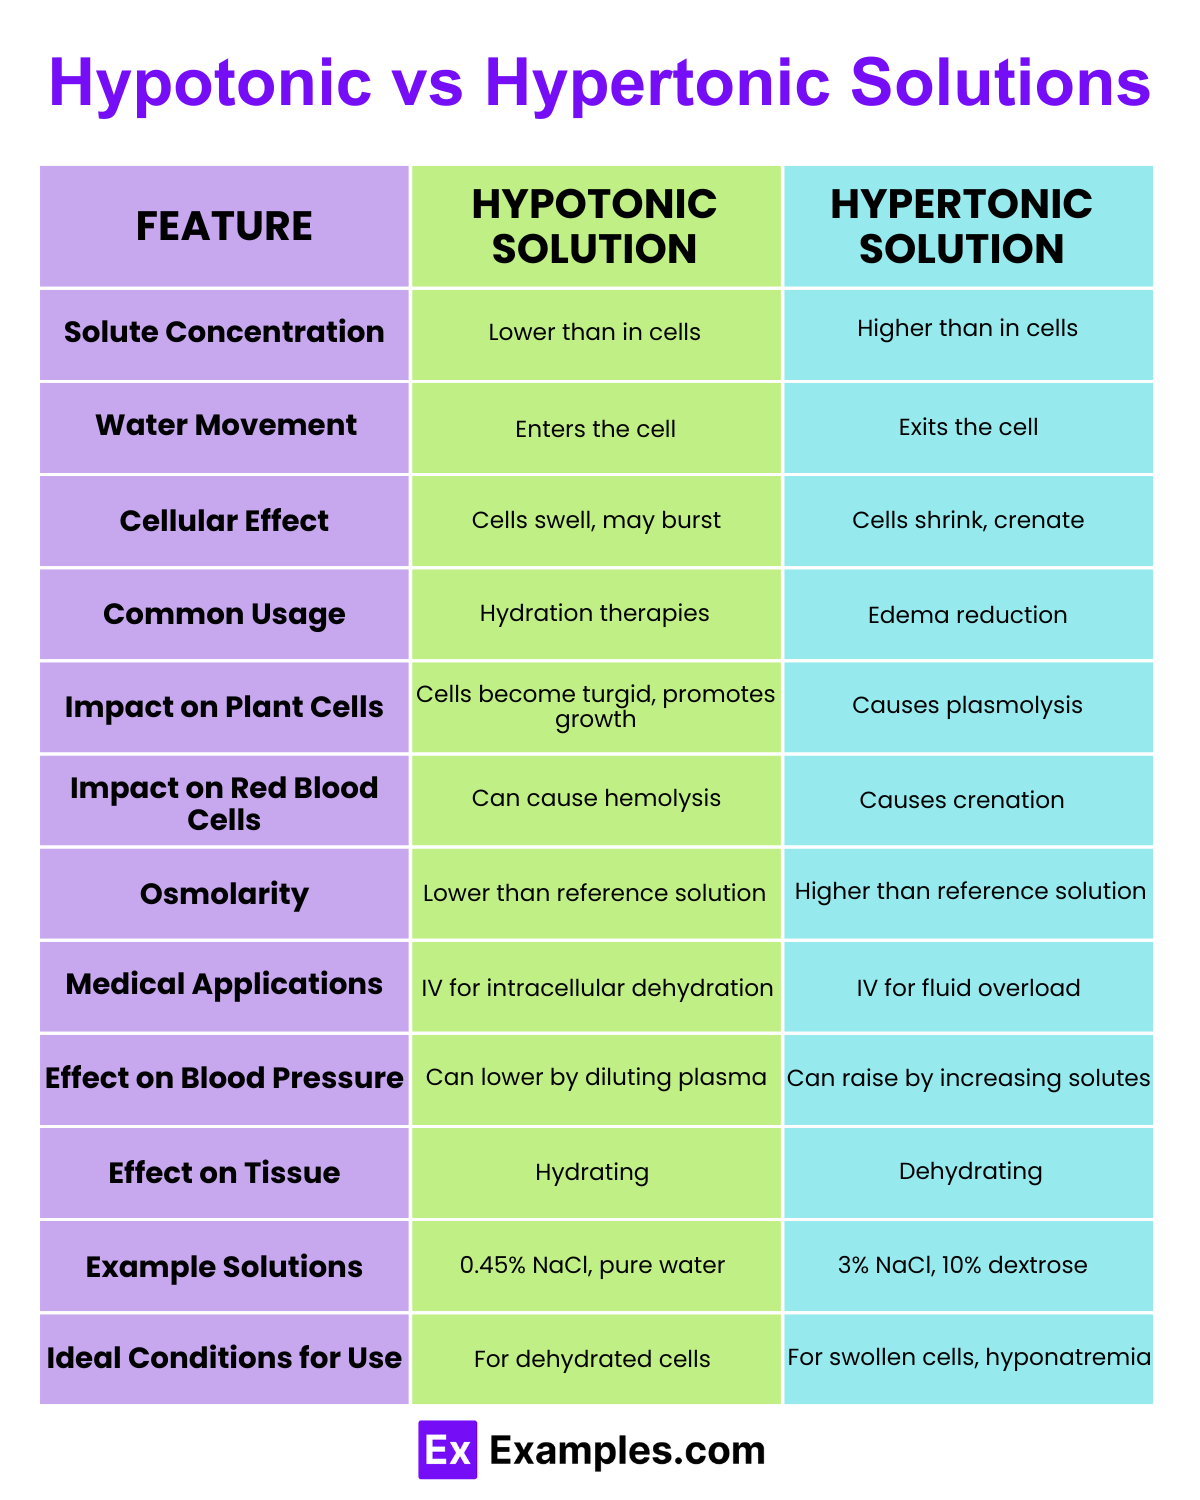 Differences Between Hypotonic and Hypertonic Solutions